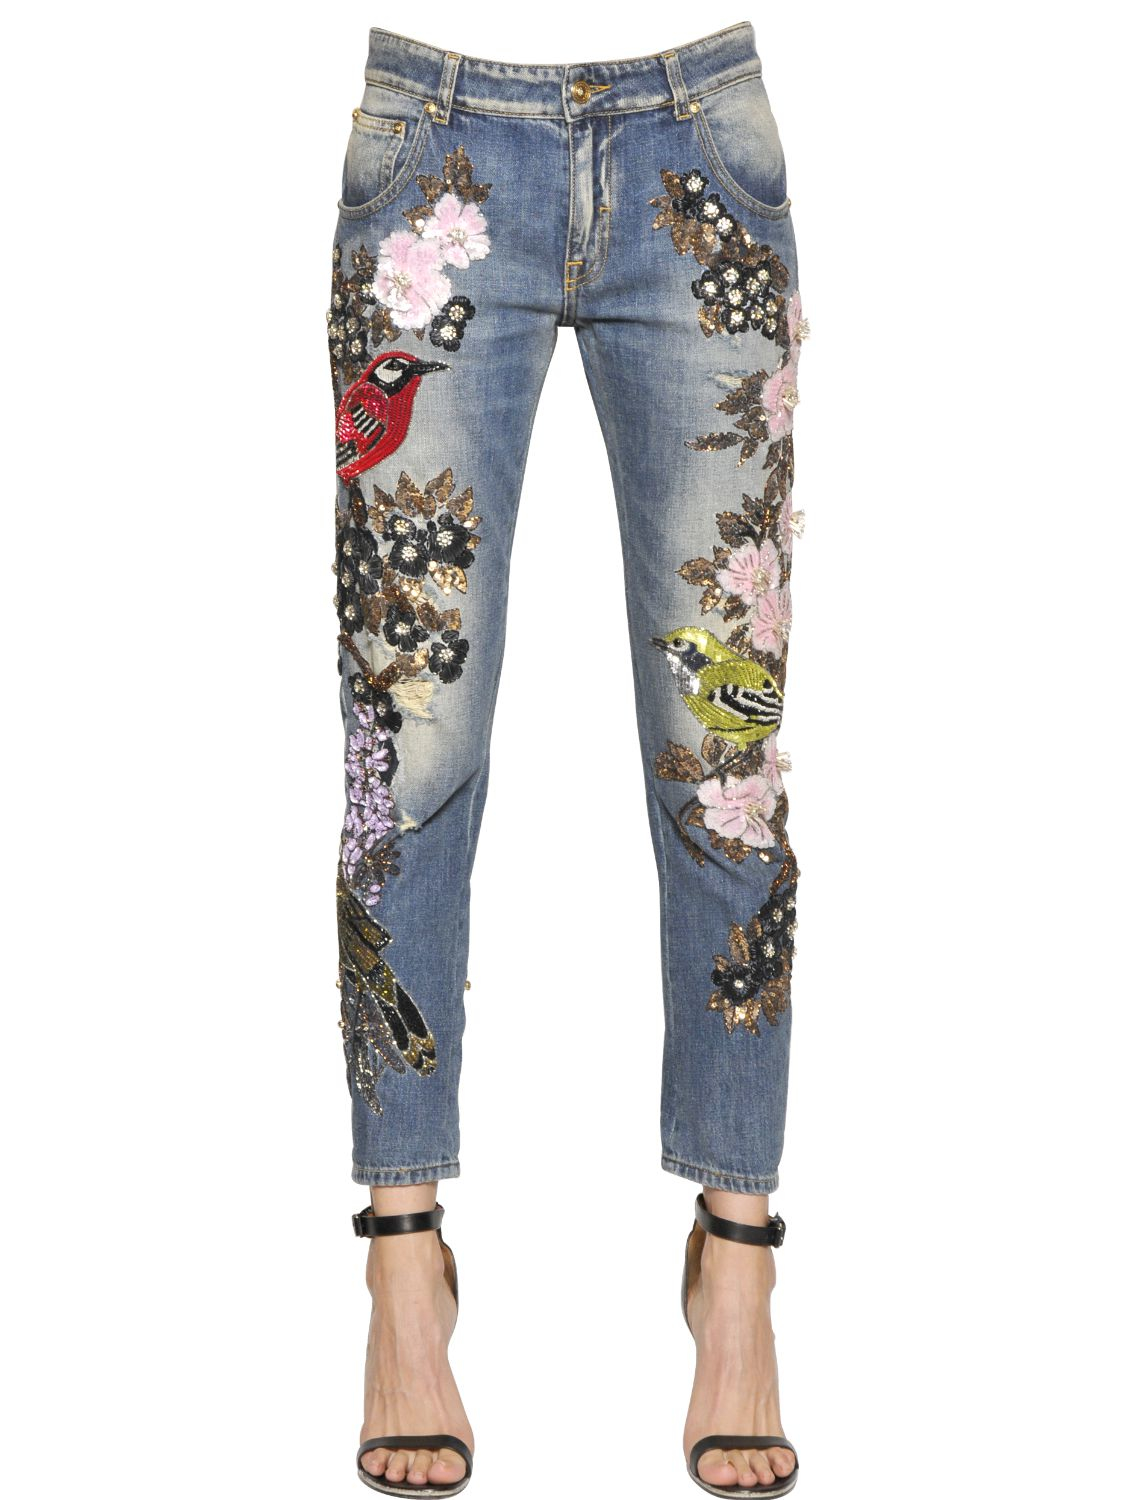 Lyst - Amen Couture Embellished Cotton Denim Jeans in Blue